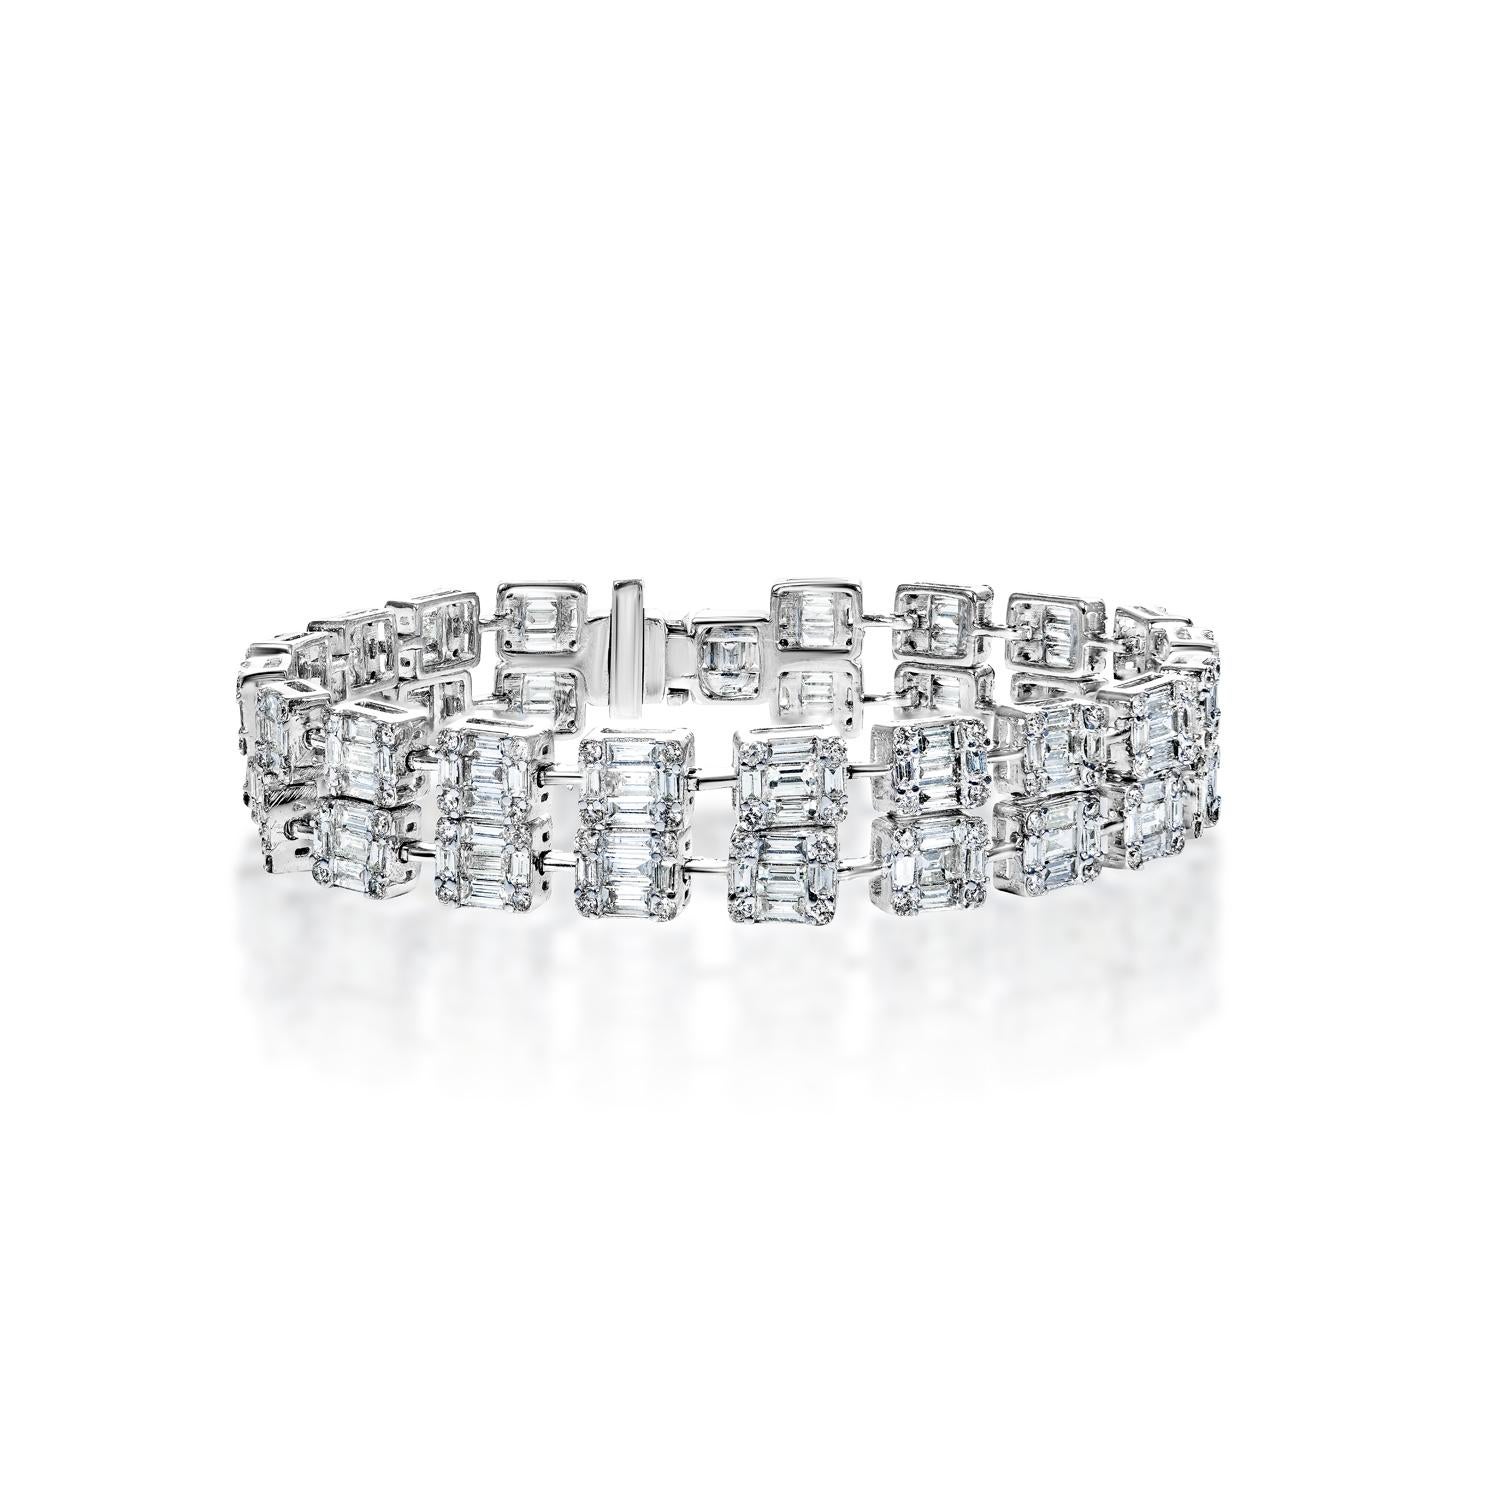 Style: Diamond Double Row Bracelet
Diamonds
Diamond Size: 14.25 Carats
Diamond Shape: Combine Mixed Shape


Setting
Metal: 14K White Gold
Metal Weight: 30.00 Grams
Clasp: Box catch with hidden safety

Total Carat Weight: 14.25 Carats